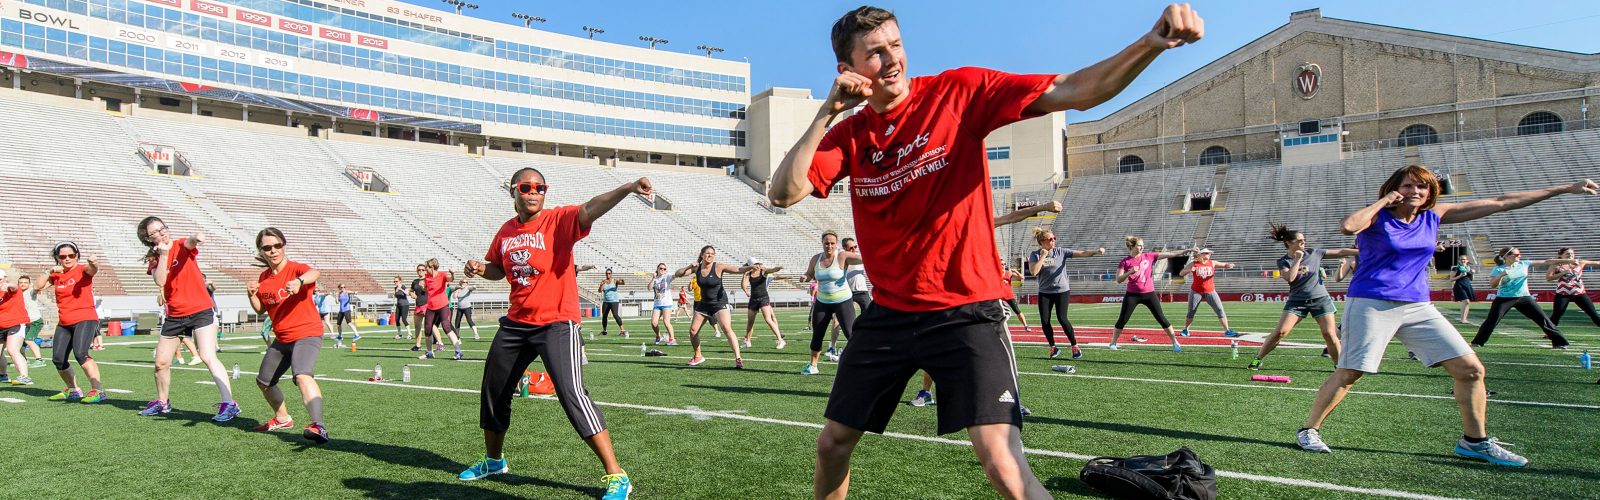 Participants in Bucky's Workout at Camp Randall Stadium doing a guided exercise routine